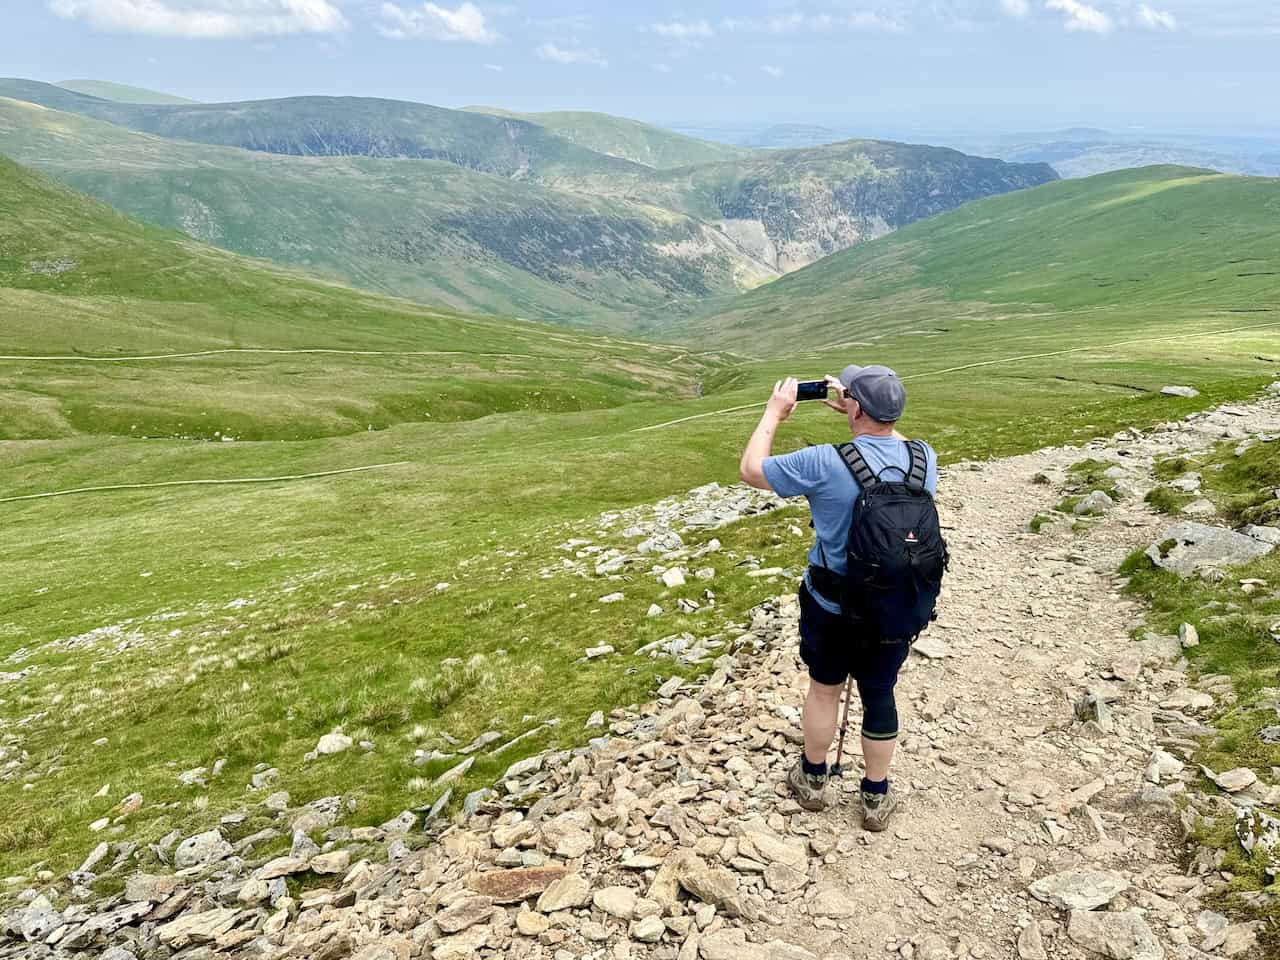 Jeff captures a photograph of the northern fells, including Sheffield Pike and Stybarrow Dodd.